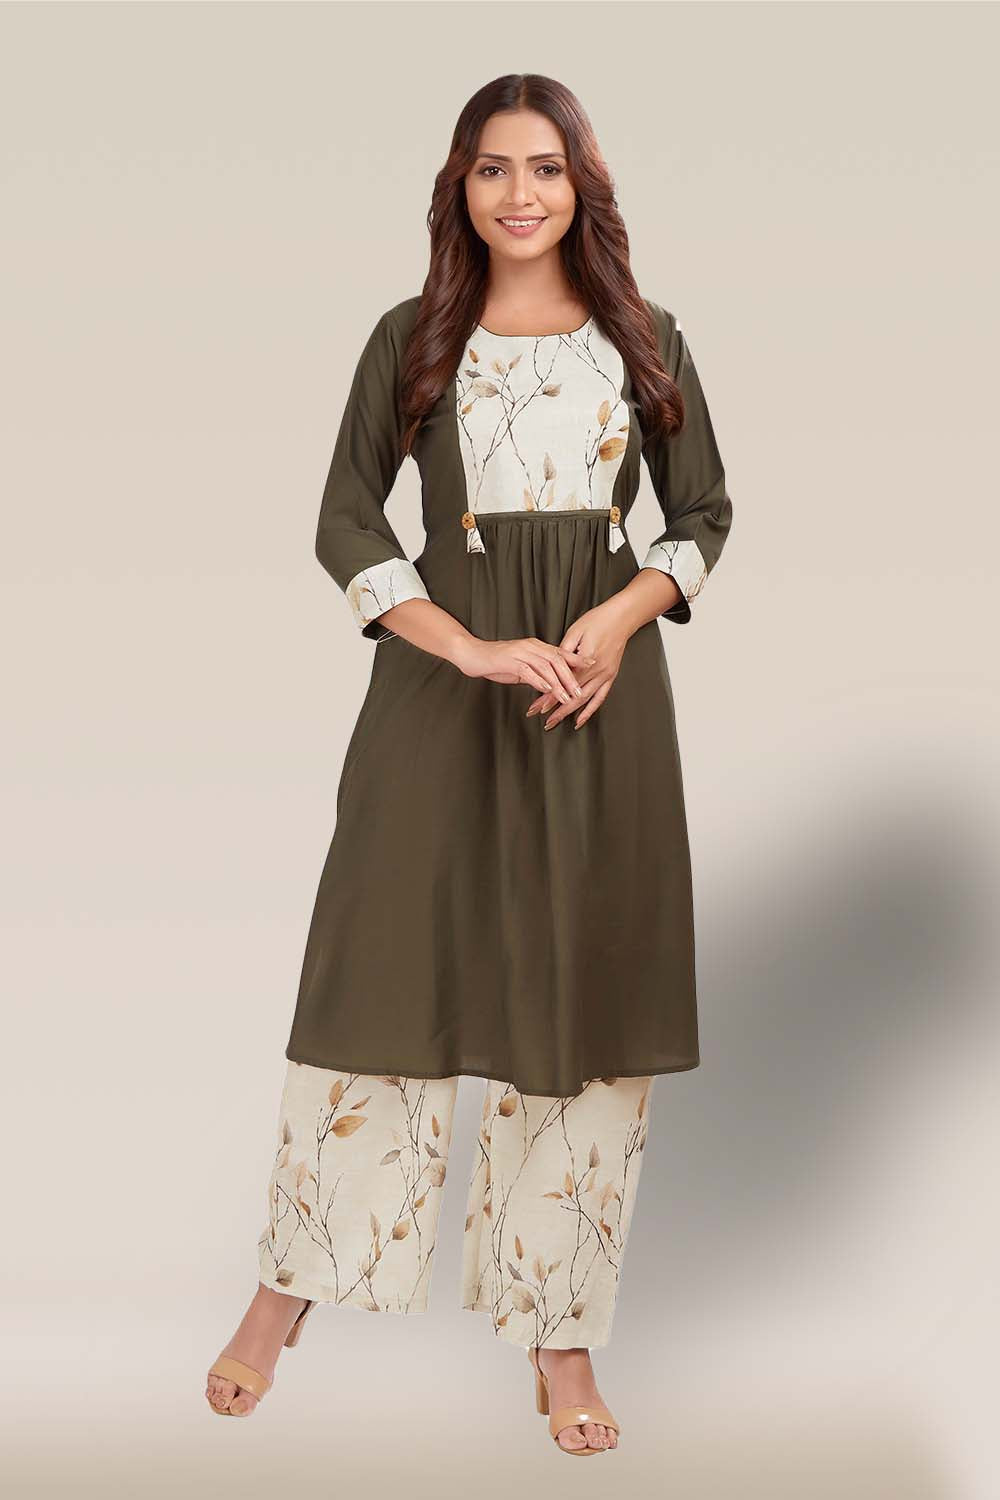 Kurti Neck Designs for Girls - Apps on Google Play